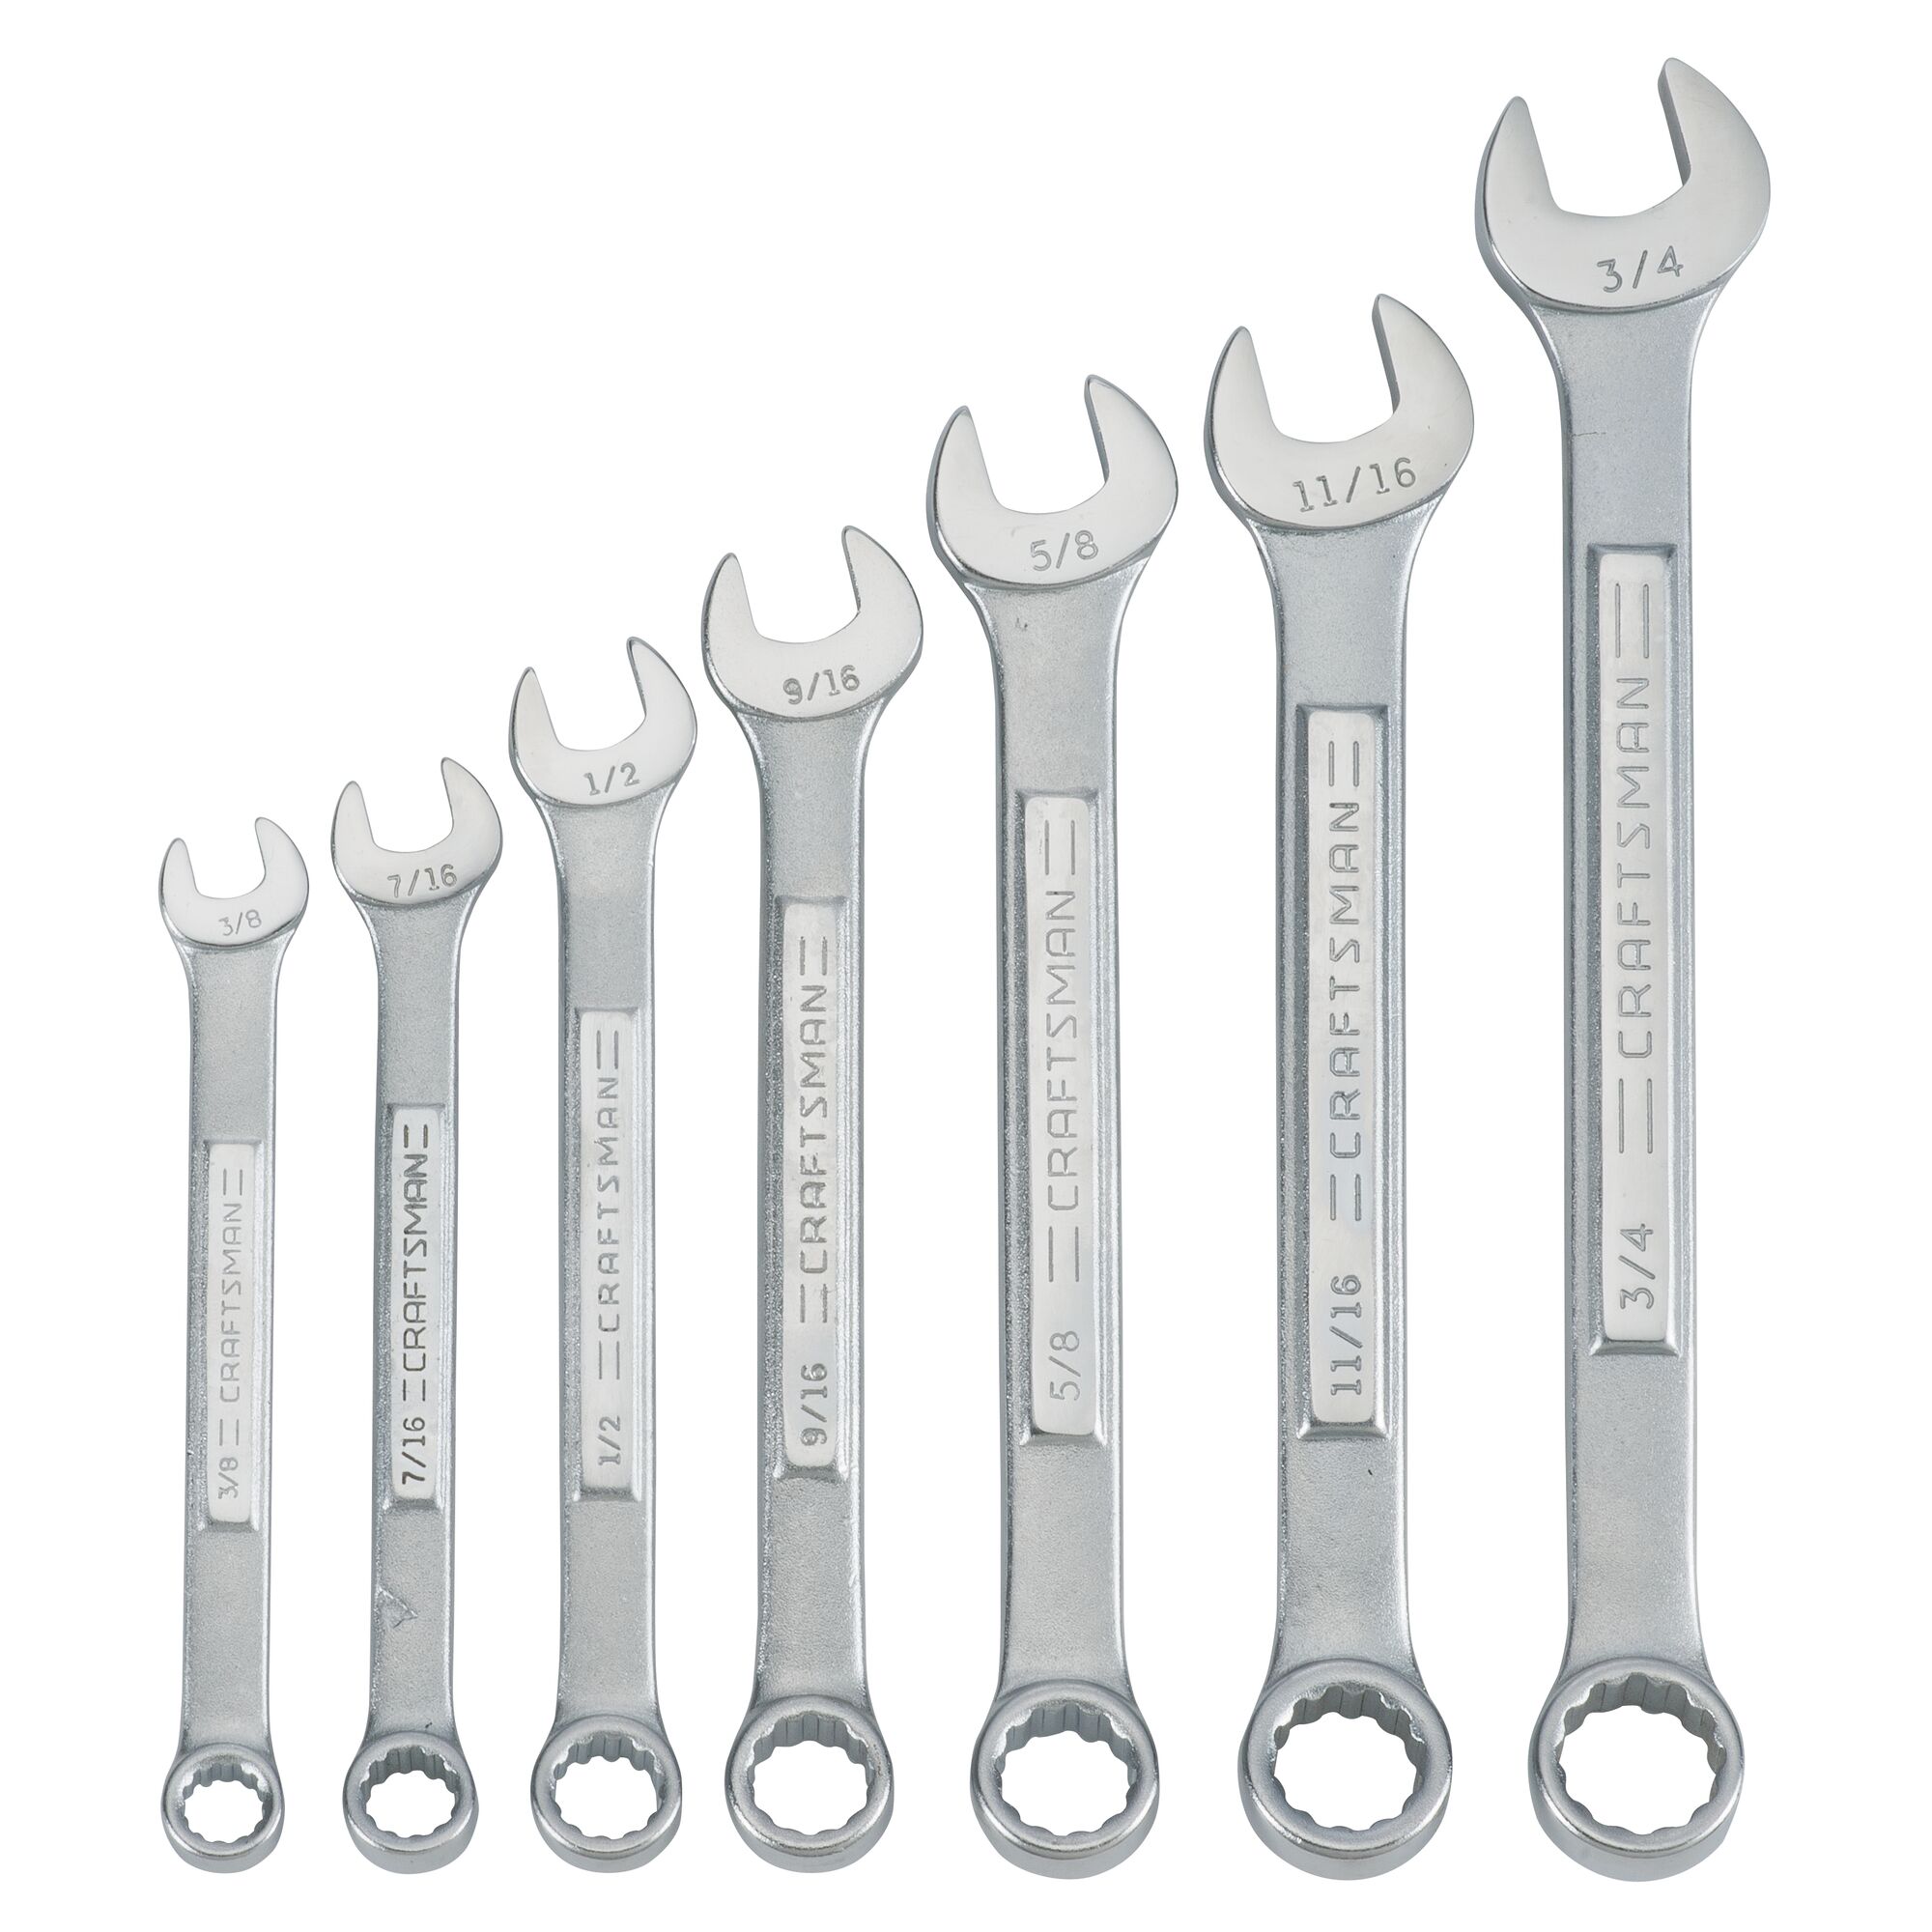 SUNEX TOOLS Combination Wrenches & Sets at Lowes.com